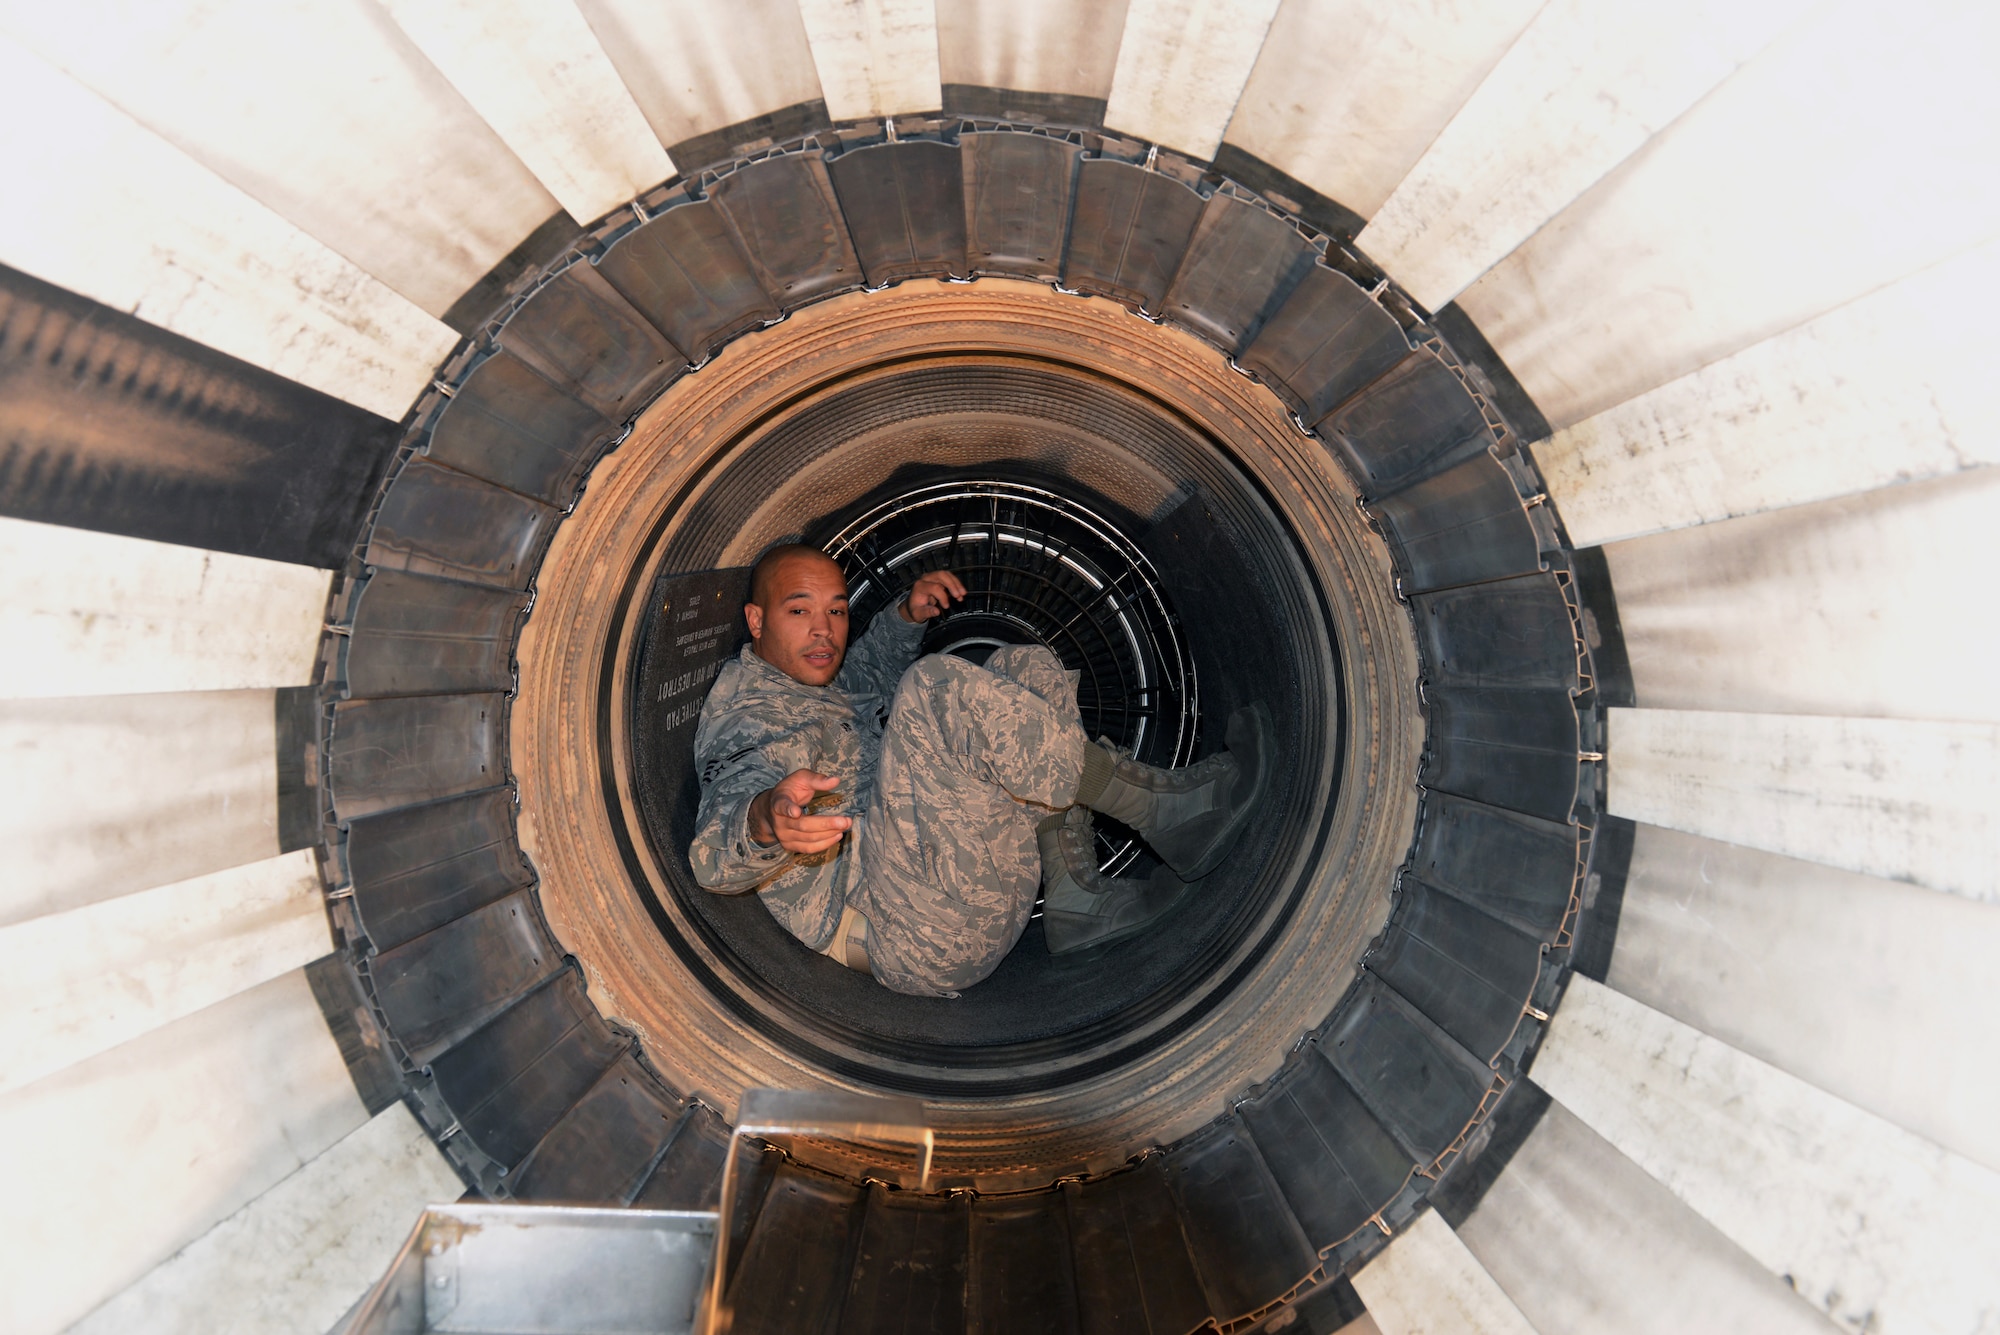 Staff Sgt. John Skipper, 57th Aircraft Maintenance Squadron Viper Aircraft Maintanence Unit aerospace propulsion craftsman, works on an engine at Detachment 13, 372nd Training Squadron on Nellis Air Force Base, Nev., Sept. 10, 2015. Detachment 13 gives Airmen advanced specialized training skills needed to help further their units’ missions. (U.S. Air Force photo by Airman 1st Class Rachel Loftis)